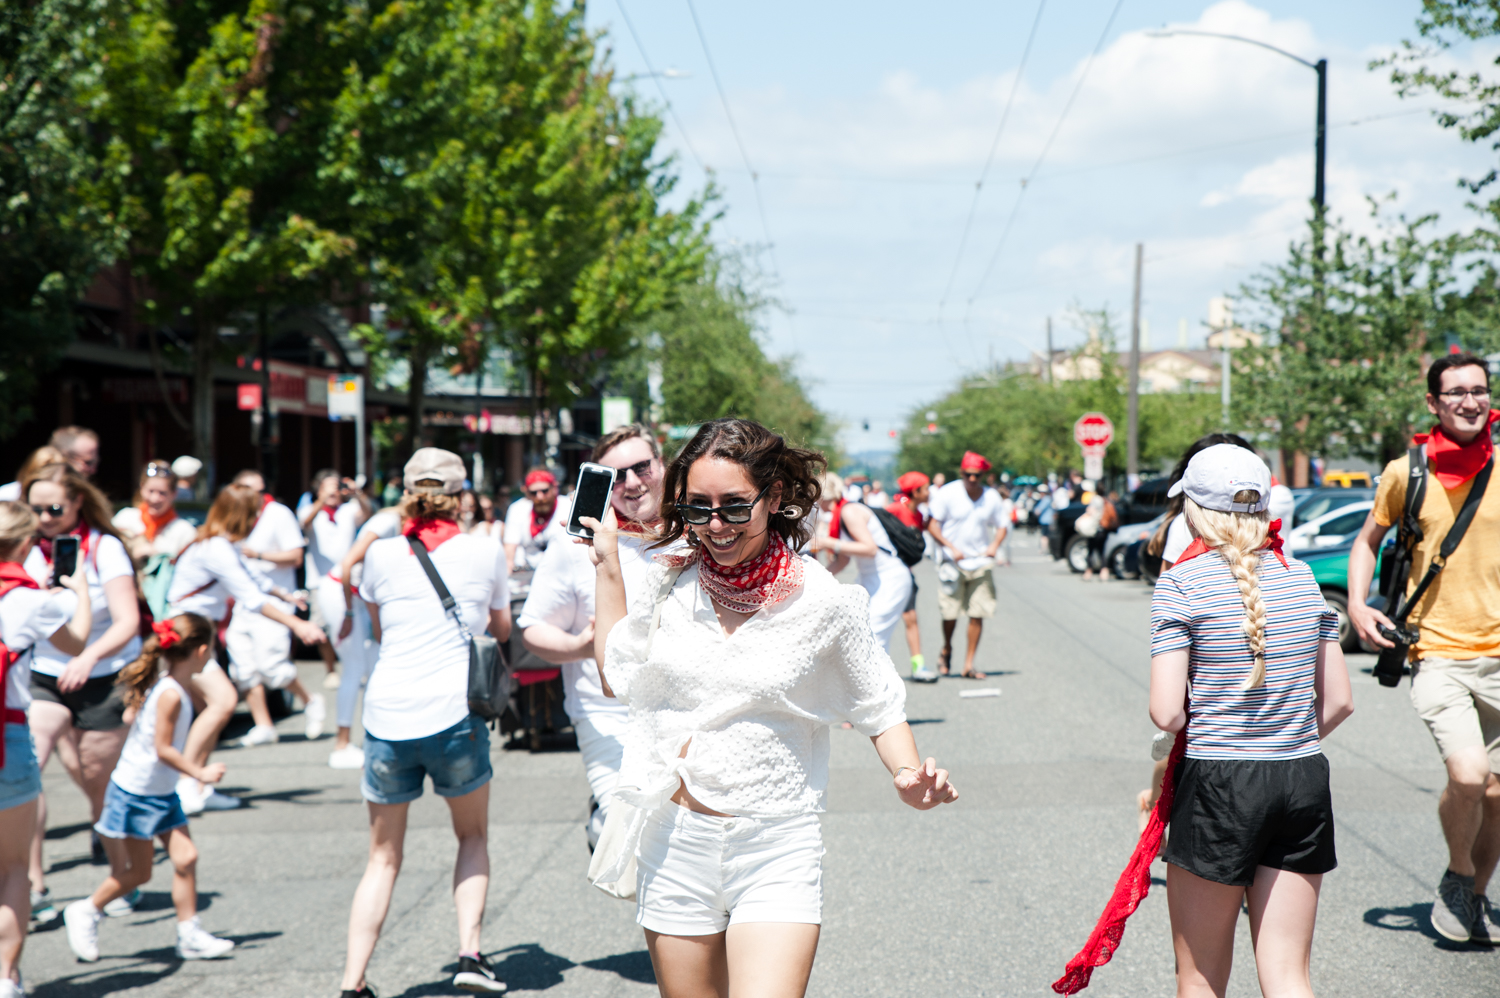 Photos The 10th Queen Anne Running of the Bulls was a sight to behold